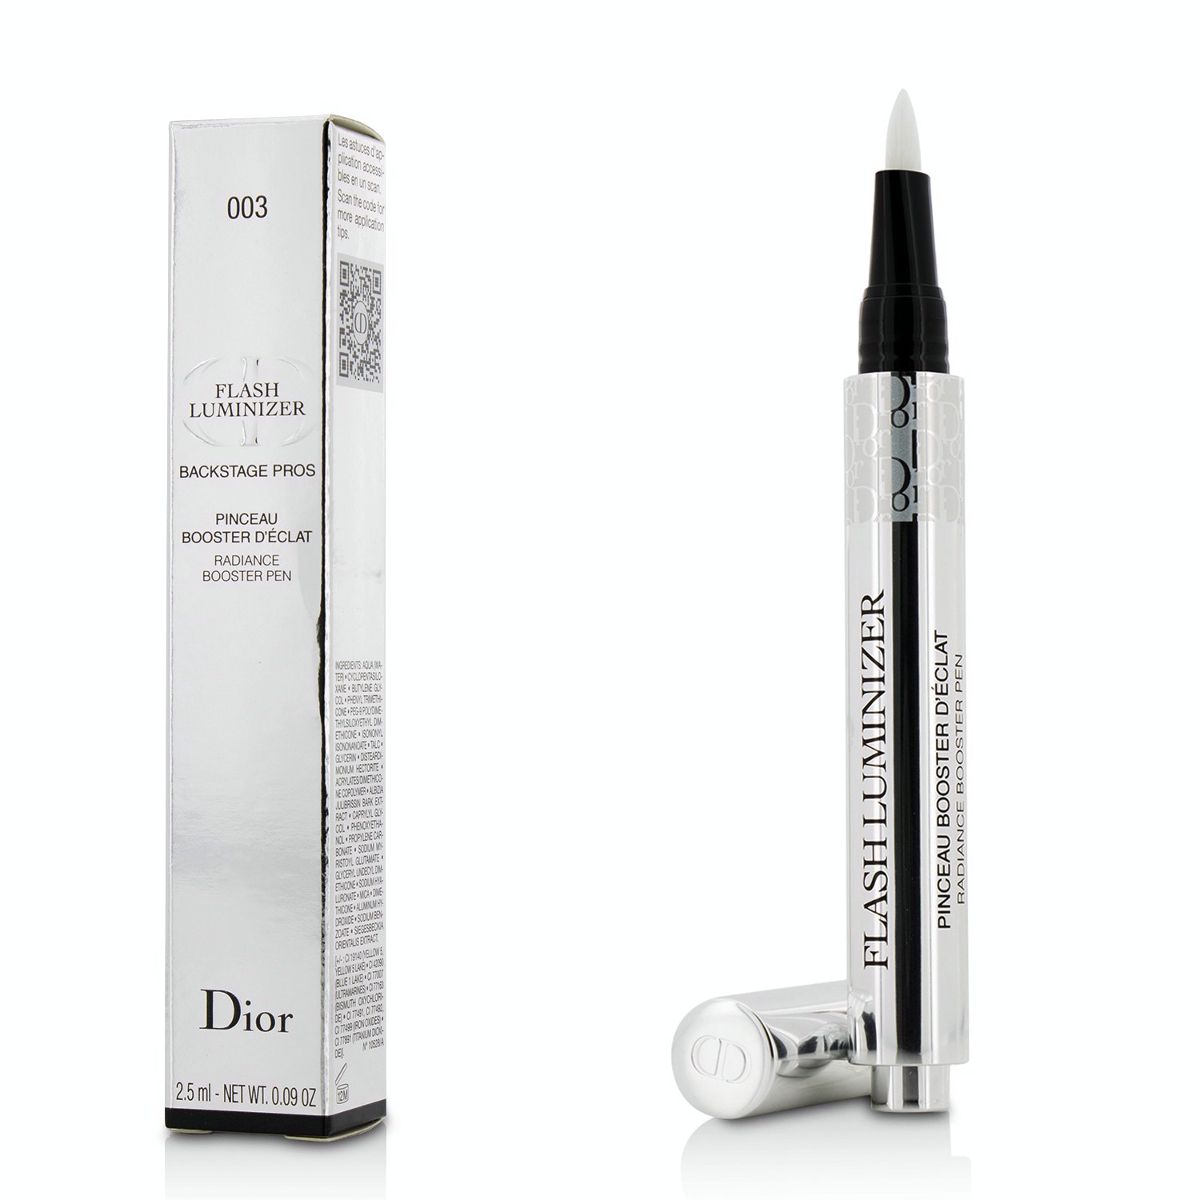 Flash Luminizer Radiance Booster Pen - # 003 Apricot Christian Dior Image